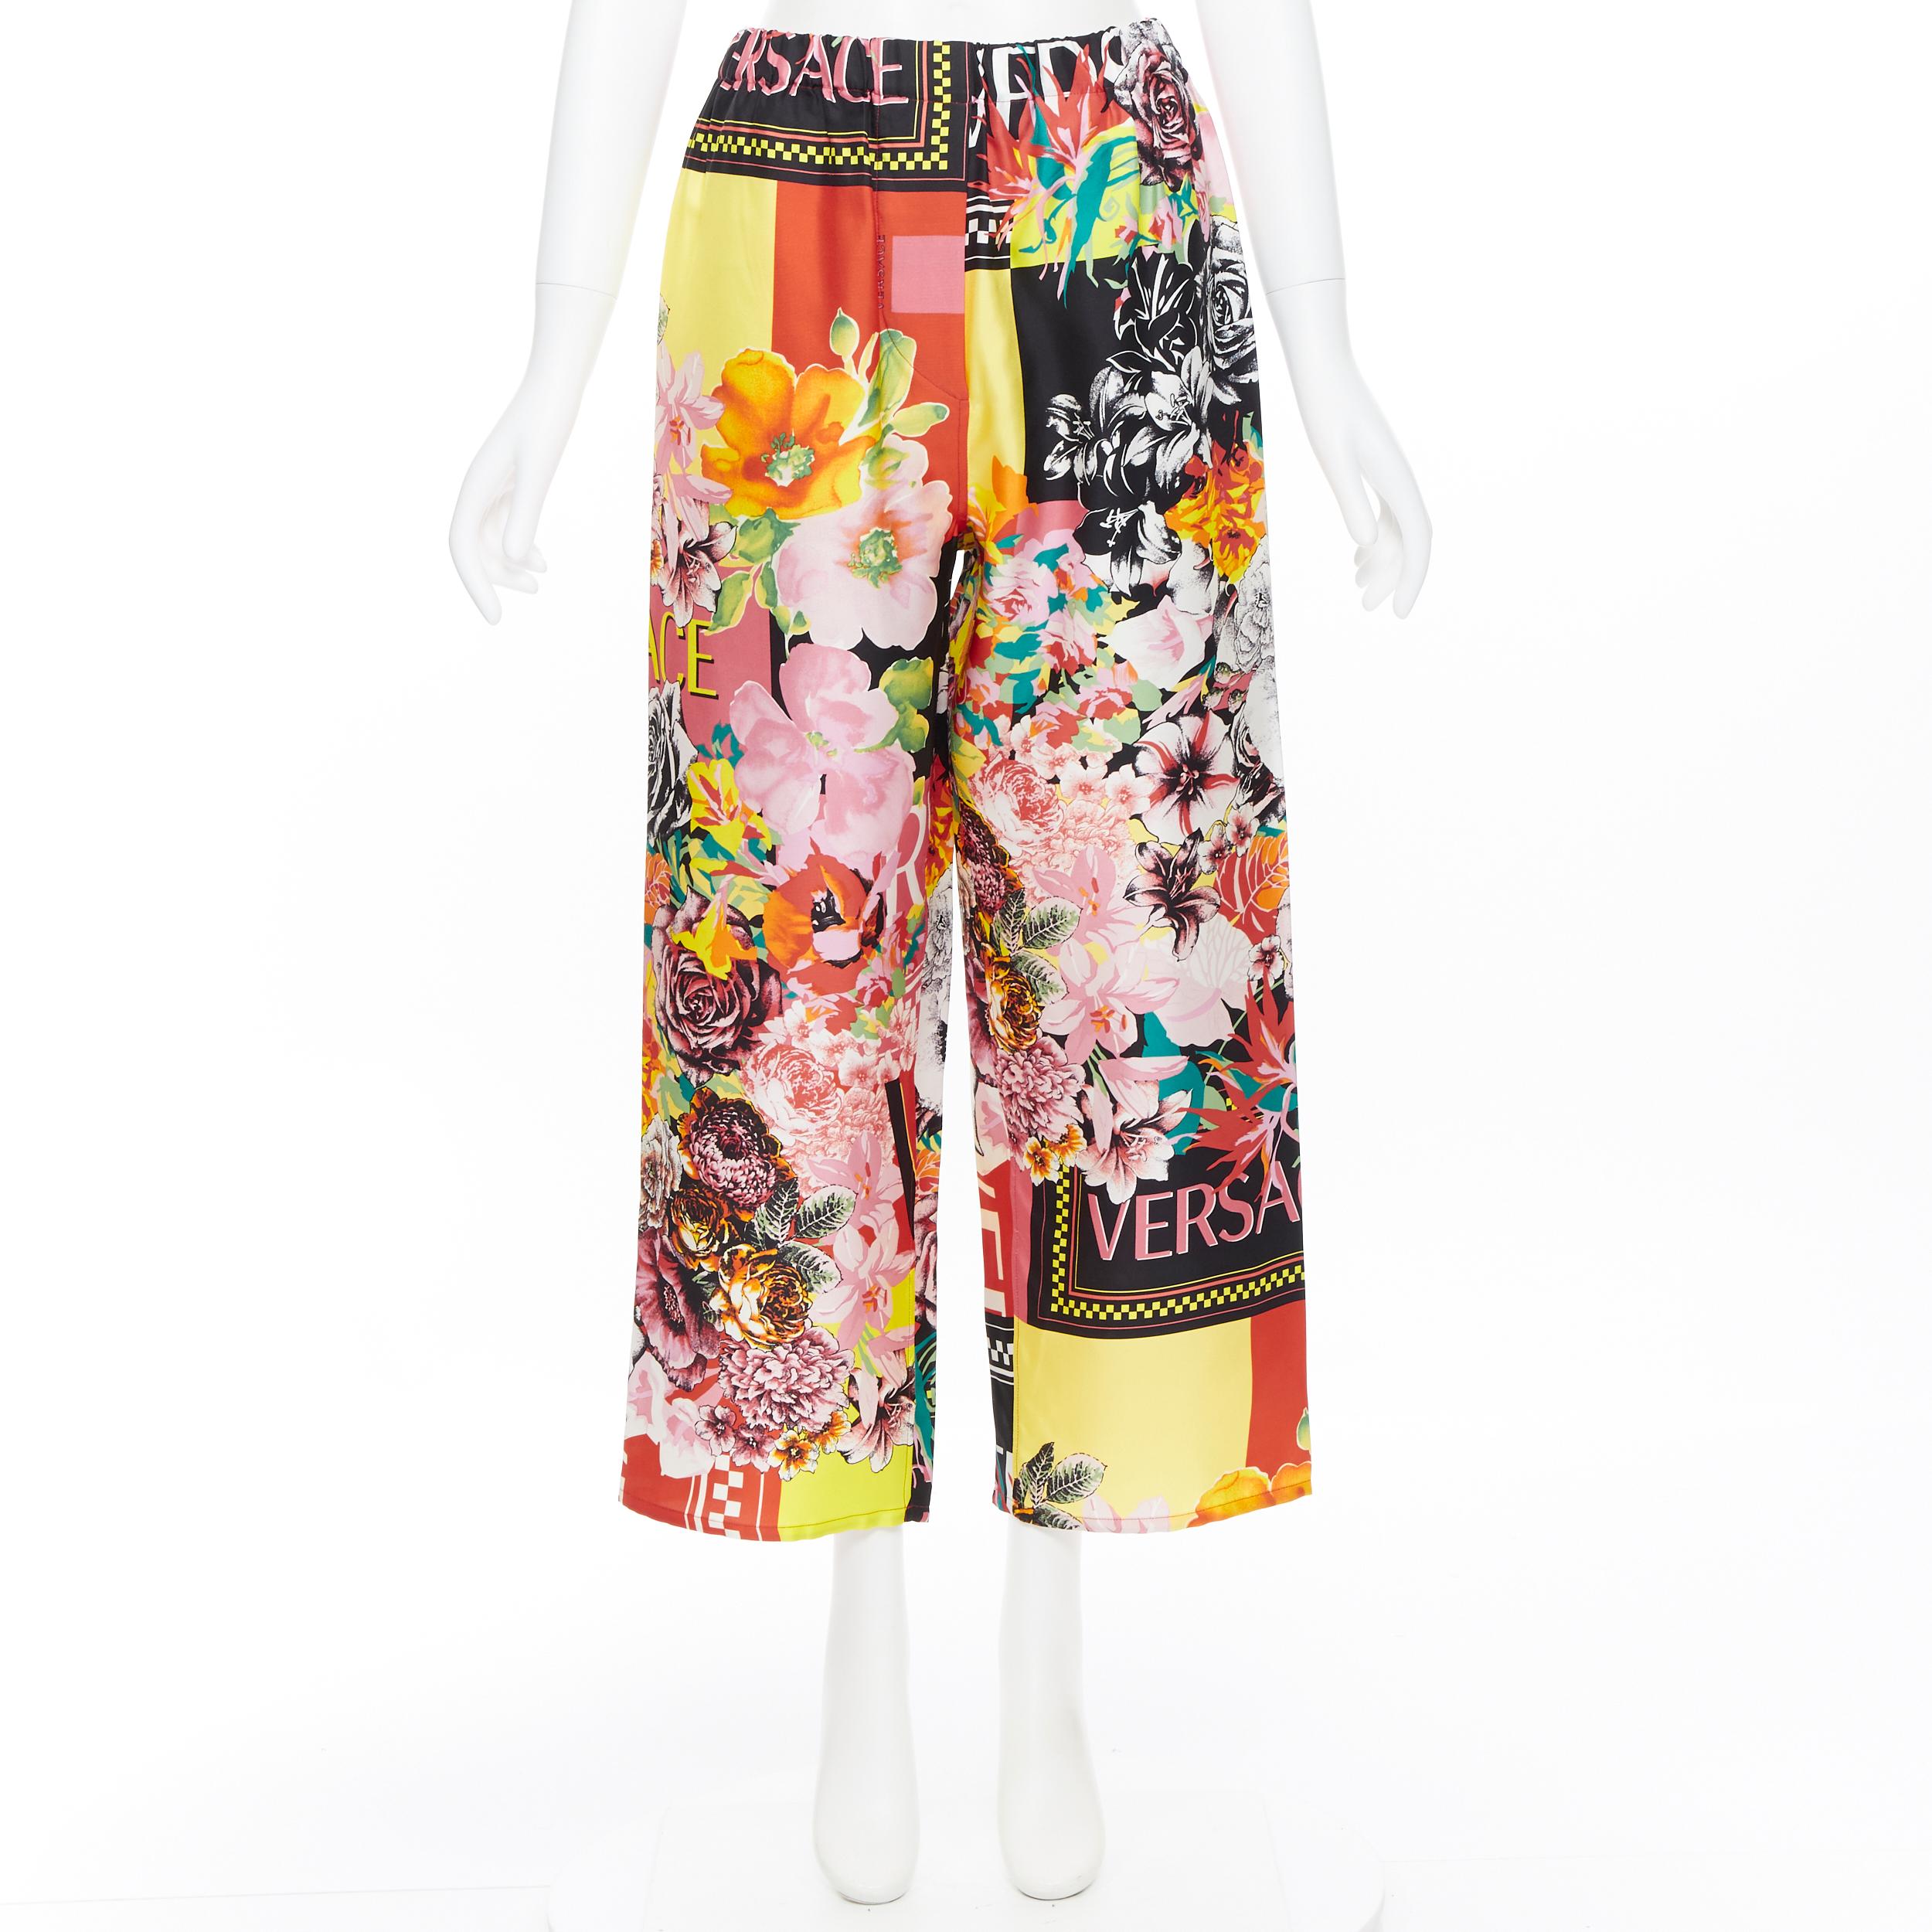 new VERSACE 100% silk SS19 floral flower 90's logo print casual pants IT42 M
Brand: Versace
Designer: Donatella Versace
Collection: SS19 Runway Print
Model Name / Style: Silk pants
Material: Silk
Color: Multicolour
Pattern: Floral
Extra Detail: